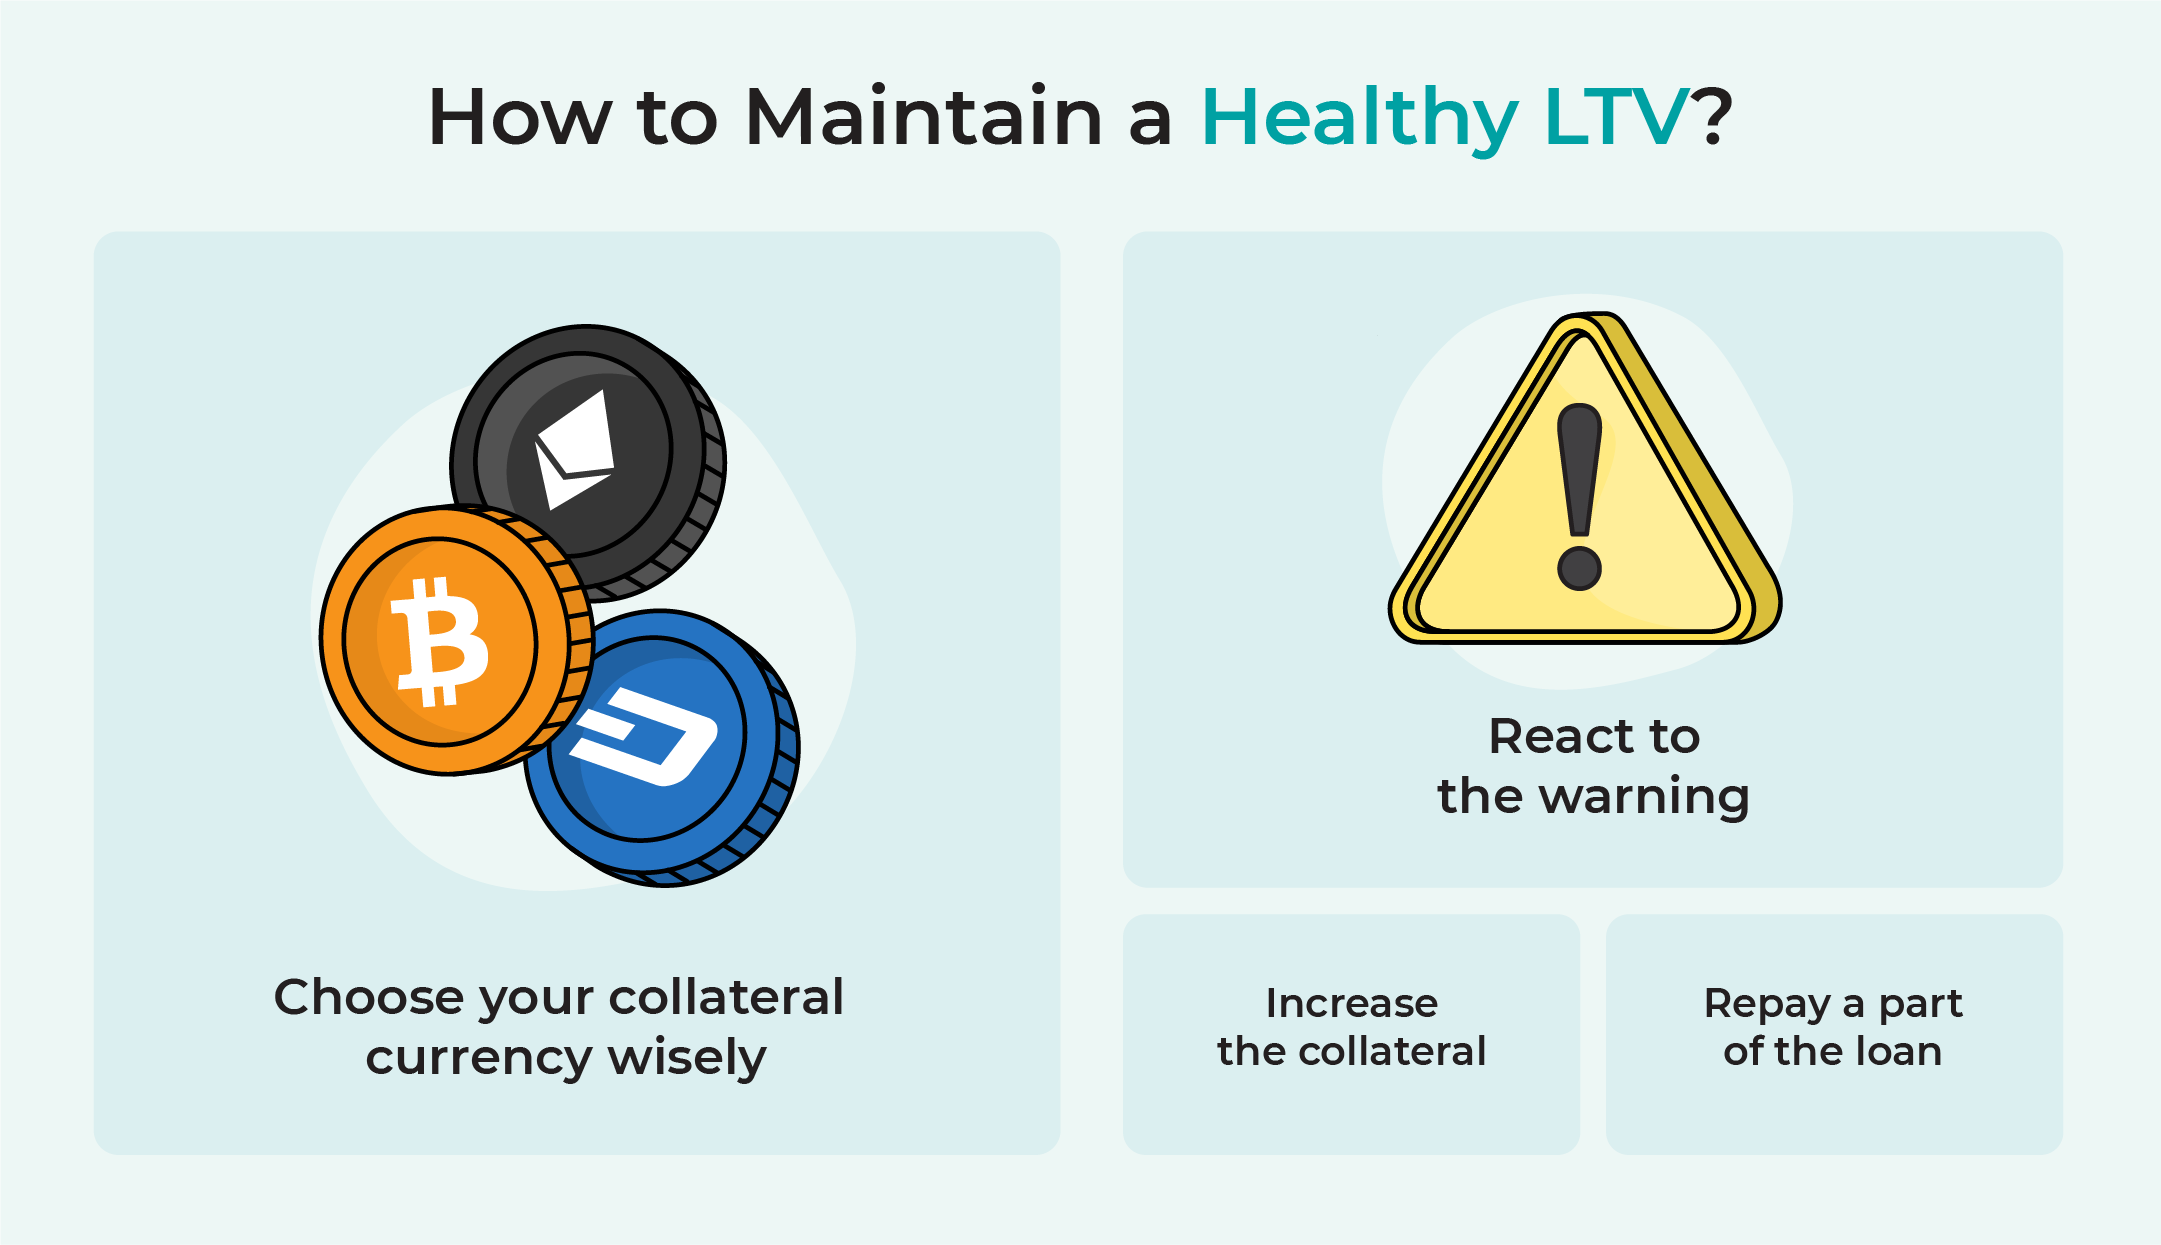 Advice on how to maintain a healthy LTV